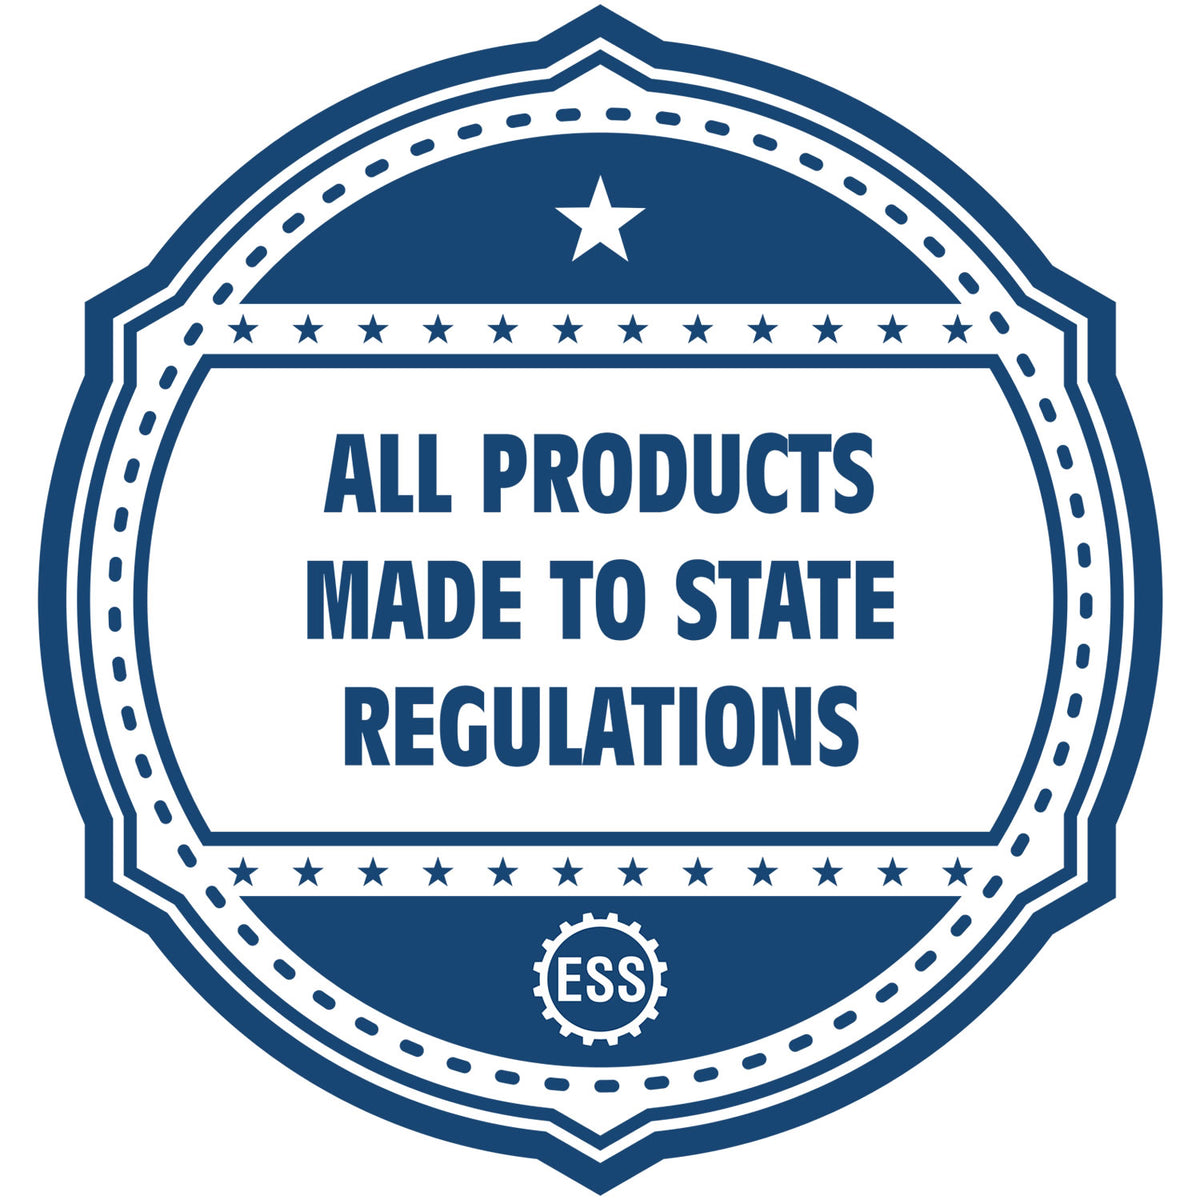 An icon or badge element for the Extended Long Reach Arizona Architect Seal Embosser showing that this product is made in compliance with state regulations.